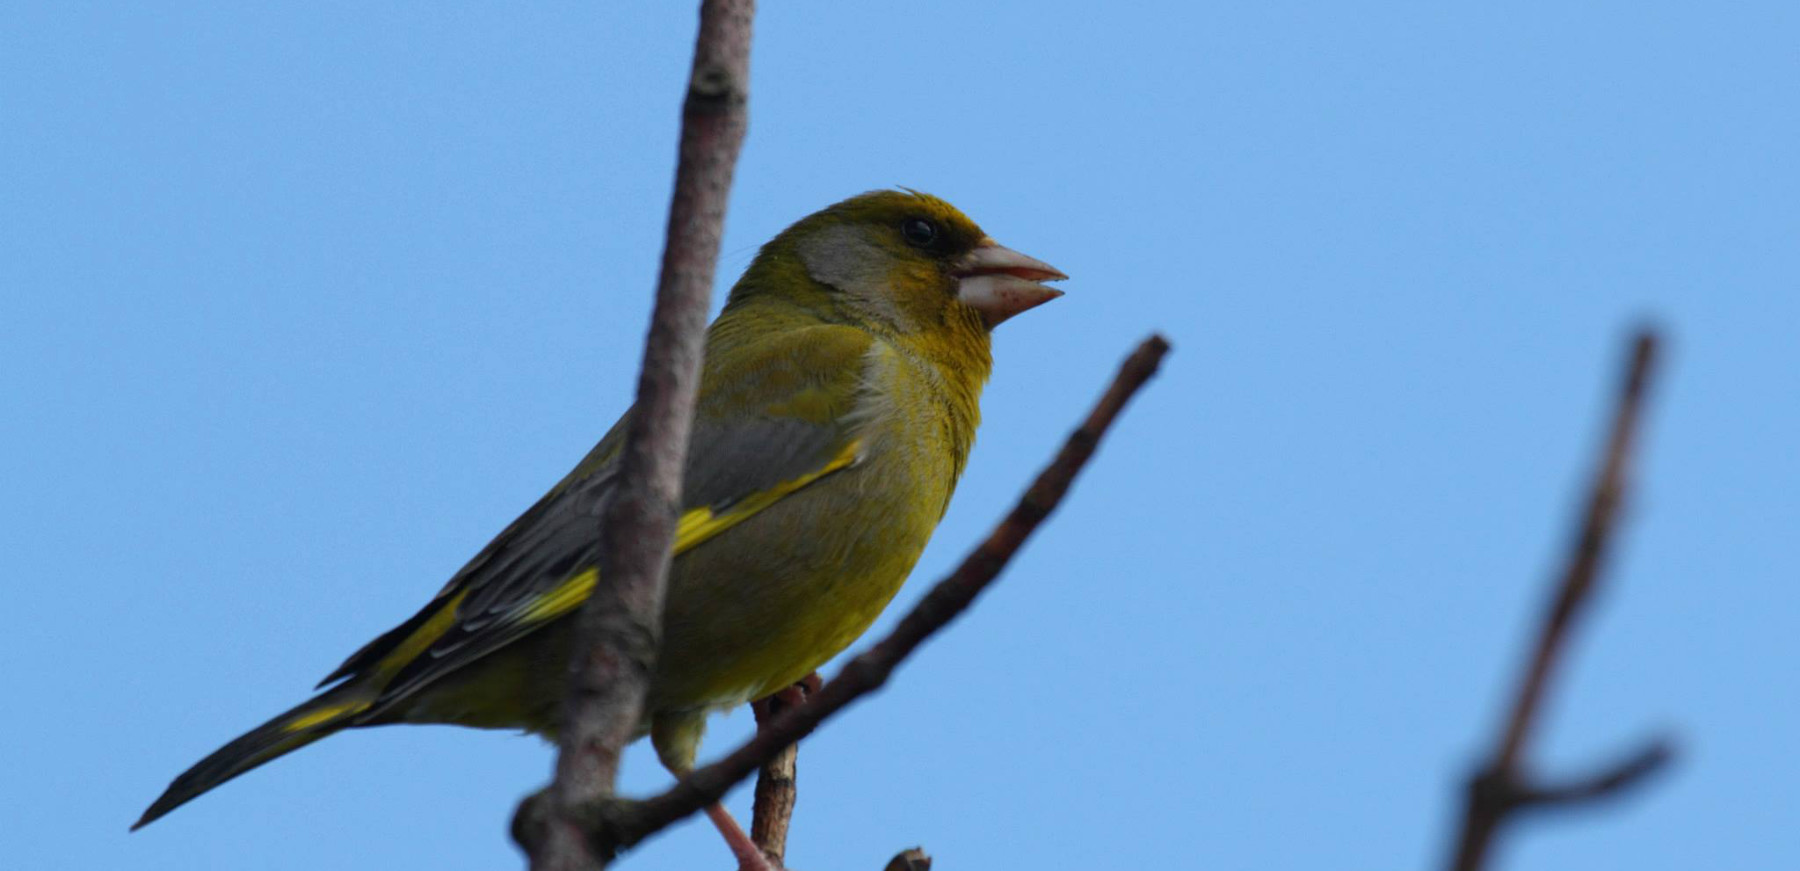 A yellow bird perched on a tree